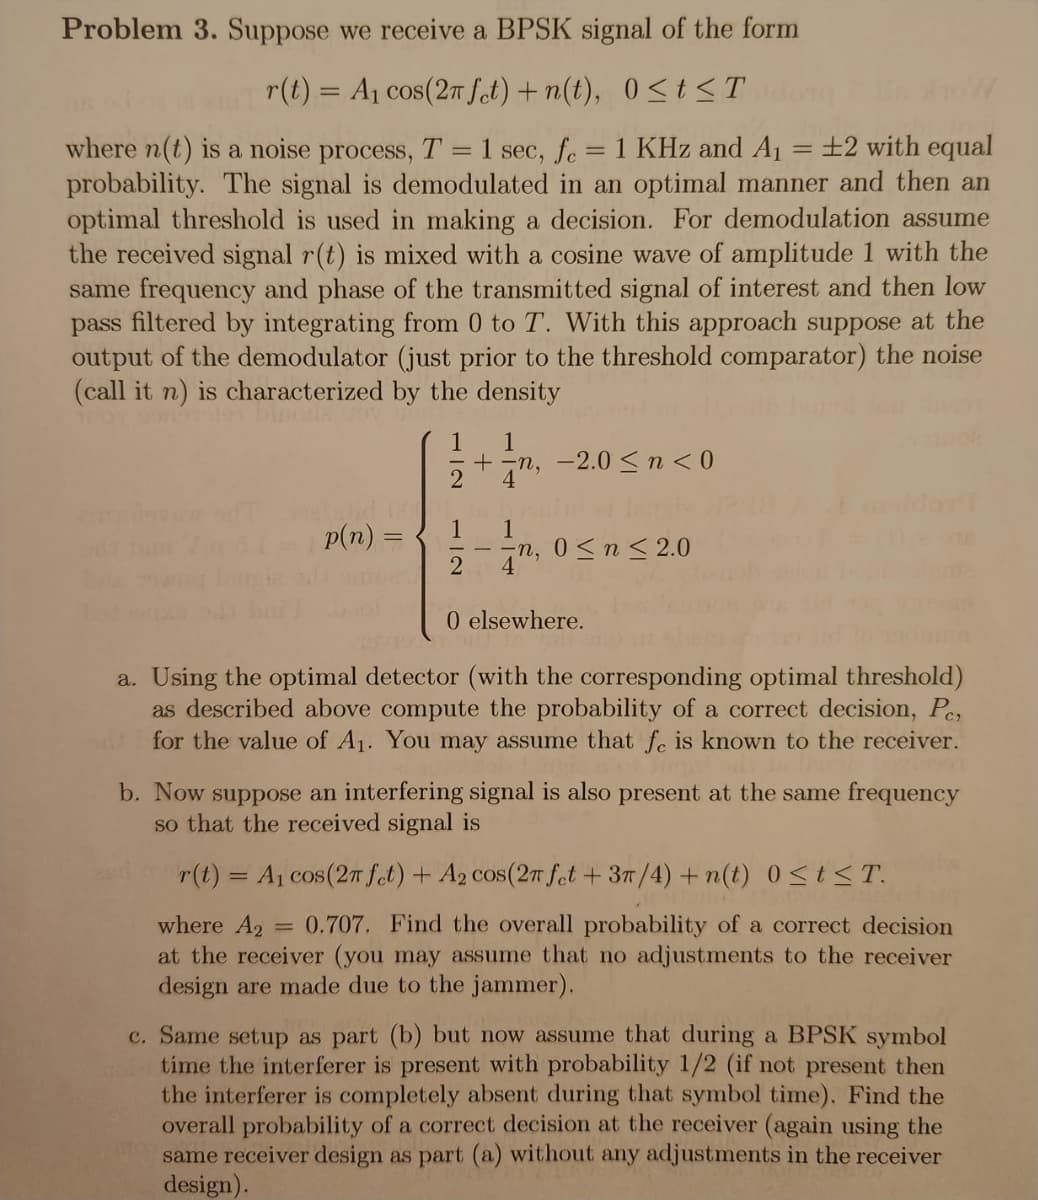 Problem 3. Suppose we receive a BPSK signal of the form
r(t) = A₁ cos(2π fet) +n(t), 0≤t≤T
==
=
where n(t) is a noise process, T = 1 sec, fc = 1 KHz and A₁ ±2 with equal
probability. The signal is demodulated in an optimal manner and then an
optimal threshold is used in making a decision. For demodulation assume
the received signal r(t) is mixed with a cosine wave of amplitude 1 with the
same frequency and phase of the transmitted signal of interest and then low
pass filtered by integrating from 0 to T. With this approach suppose at the
output of the demodulator (just prior to the threshold comparator) the noise
(call it n) is characterized by the density
p(n) =
1 1
-2.0 ≤ n <0
2
1
1
==
2
4
-n, 0≤ n ≤ 2.0
0 elsewhere.
a. Using the optimal detector (with the corresponding optimal threshold)
as described above compute the probability of a correct decision, Pc,
od for the value of A₁. You may assume that fe is known to the receiver.
b. Now suppose an interfering signal is also present at the same frequency
so that the received signal is
r(t) = A₁ cos(2π fet) + A2 cos(2π fet +3π/4)+n(t) 0≤t≤T.
where A2 = 0.707. Find the overall probability of a correct decision
at the receiver (you may assume that no adjustments to the receiver
design are made due to the jammer).
c. Same setup as part (b) but now assume that during a BPSK symbol
time the interferer is present with probability 1/2 (if not present then
the interferer is completely absent during that symbol time). Find the
overall probability of a correct decision at the receiver (again using the
same receiver design as part (a) without any adjustments in the receiver
design).